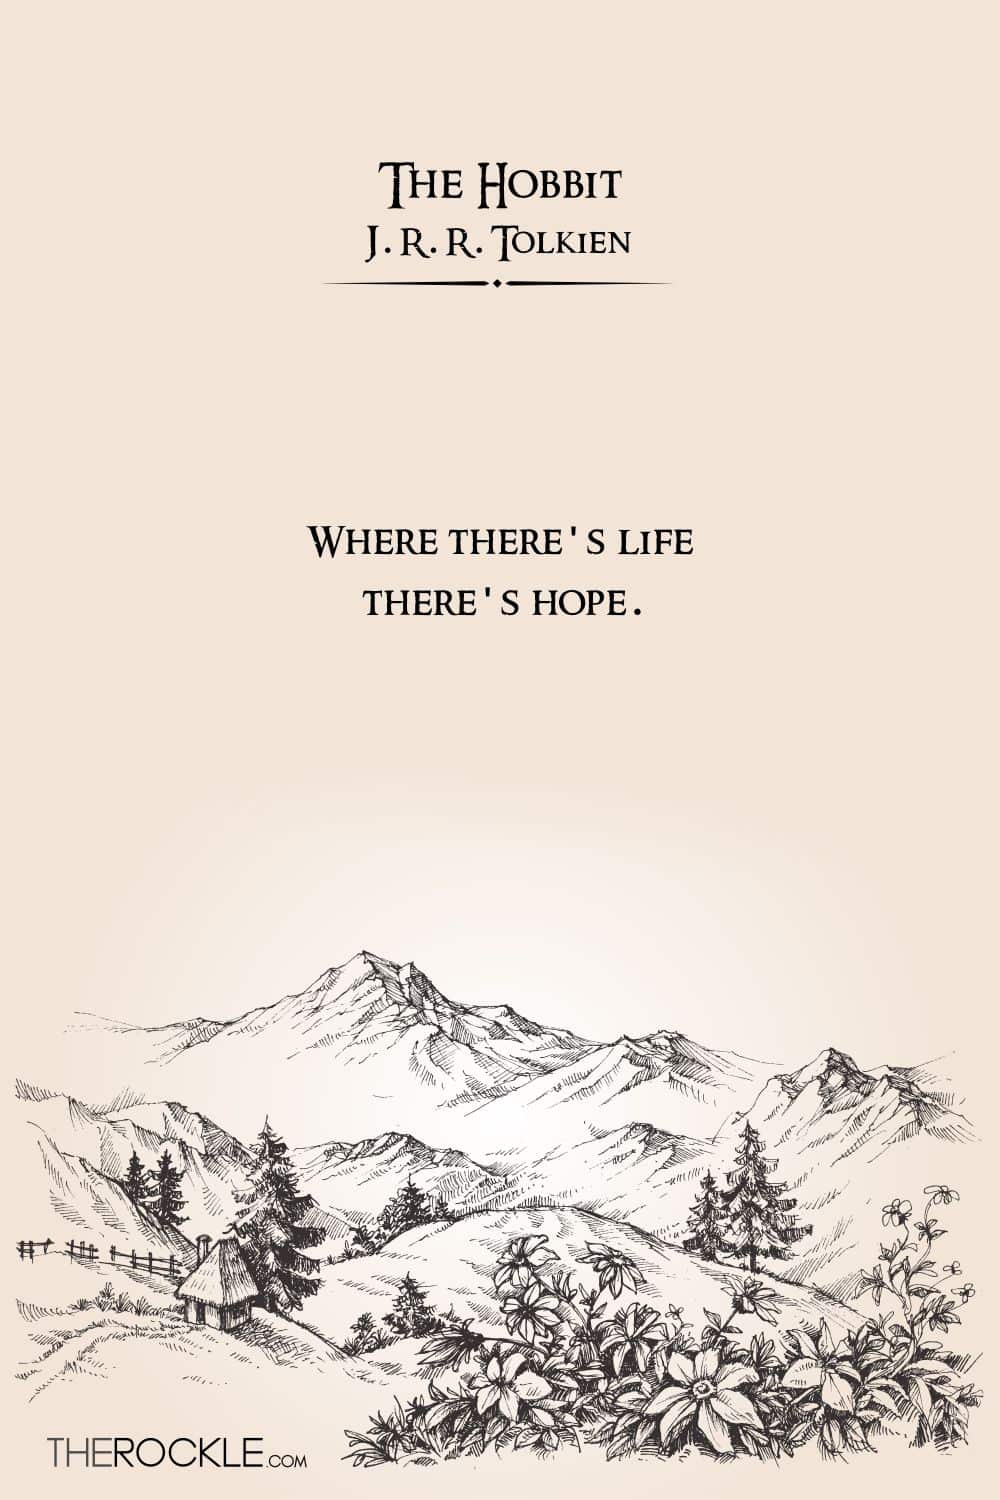 Tolkien's quote about life and hope